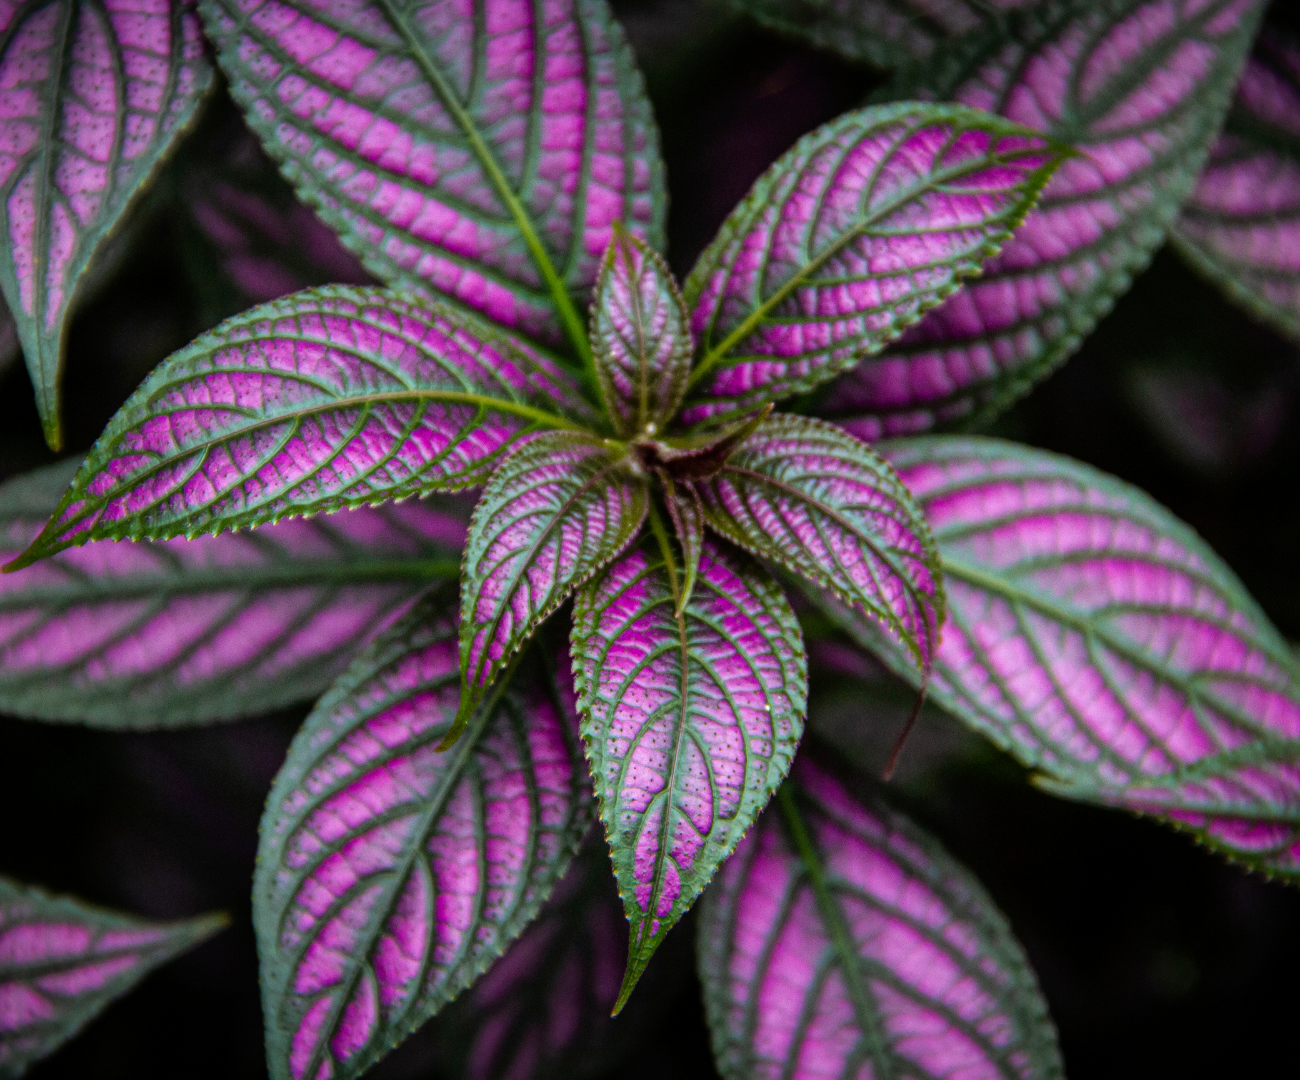 Persian Shield or Strobilanthes dyerianus the purple plant close up of leaves